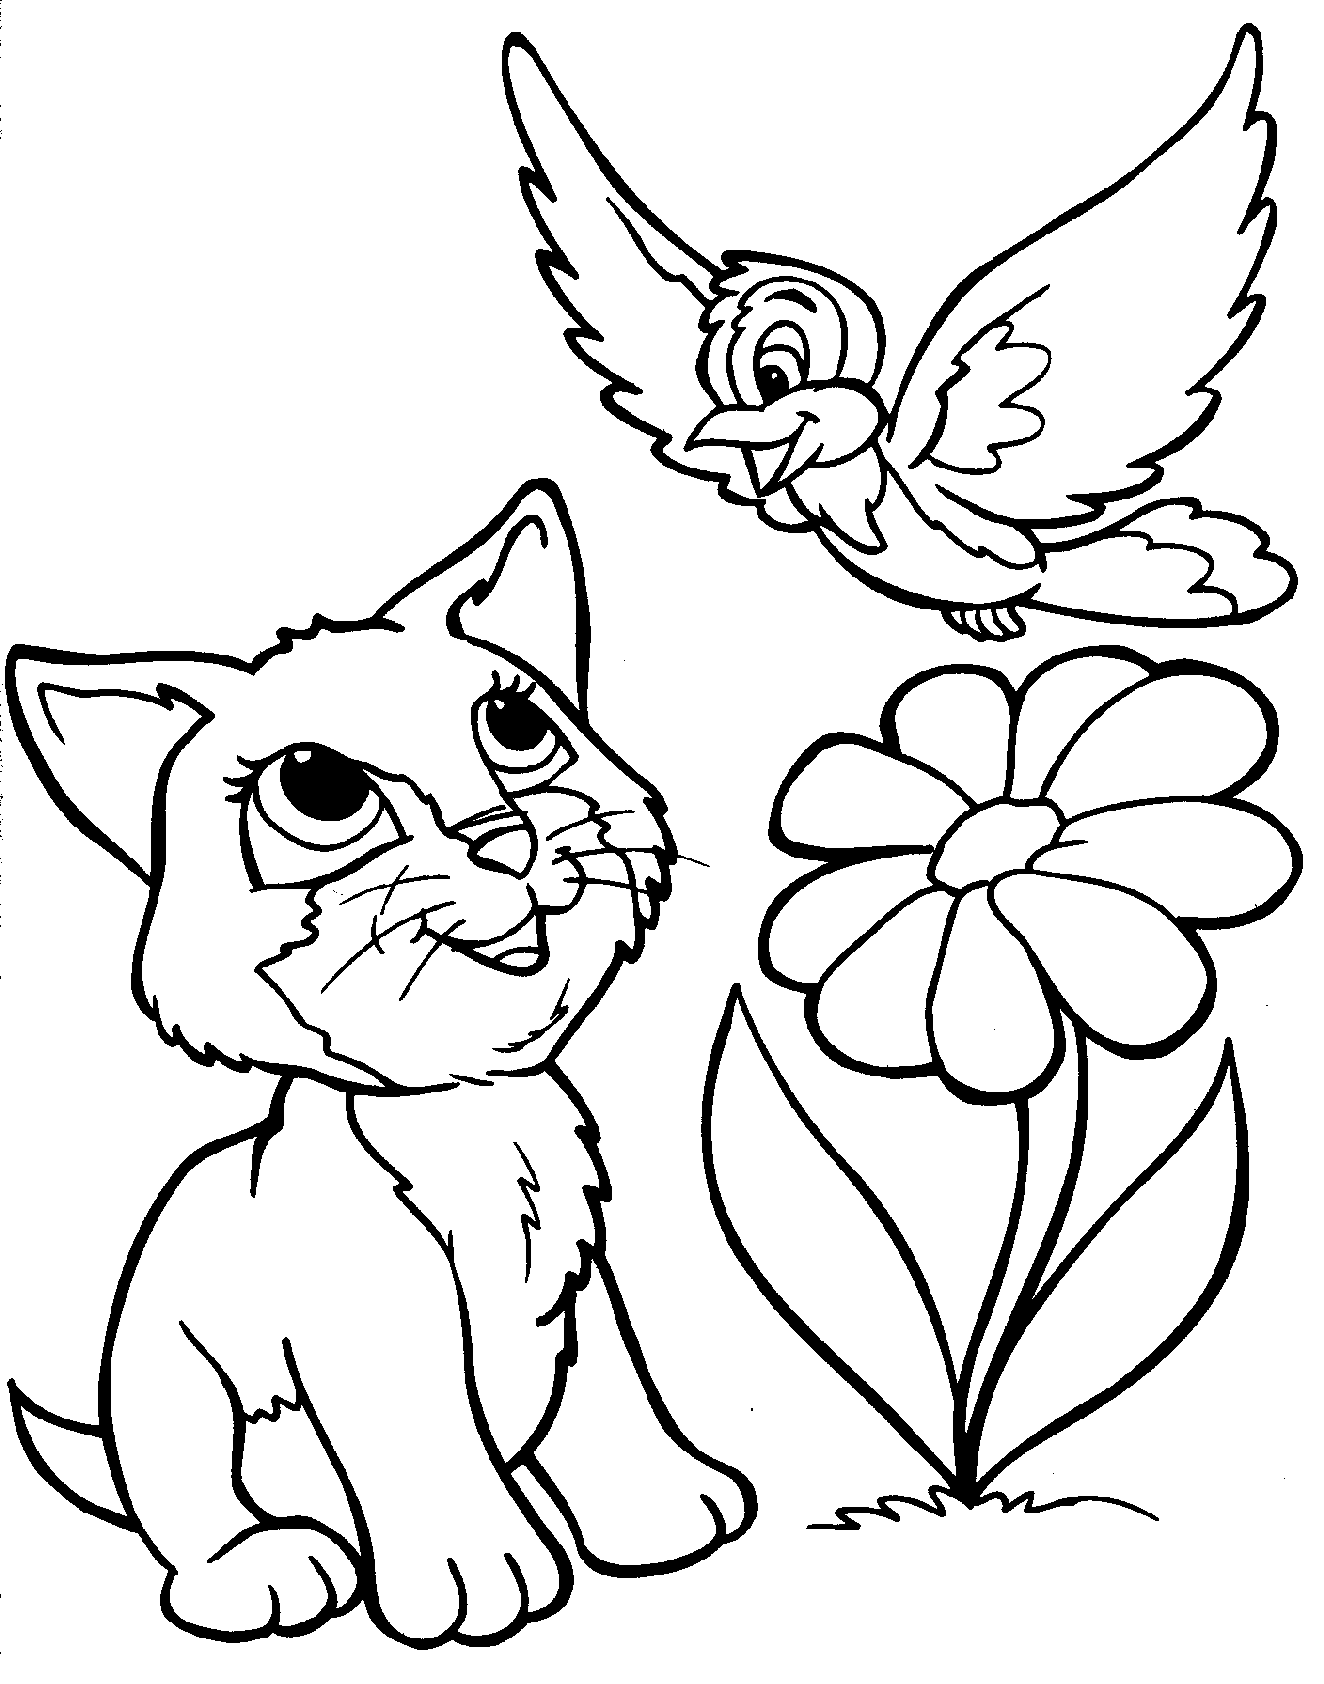 cat coloring pages free printable top 30 free printable cat coloring pages for kids coloring cat printable free pages 